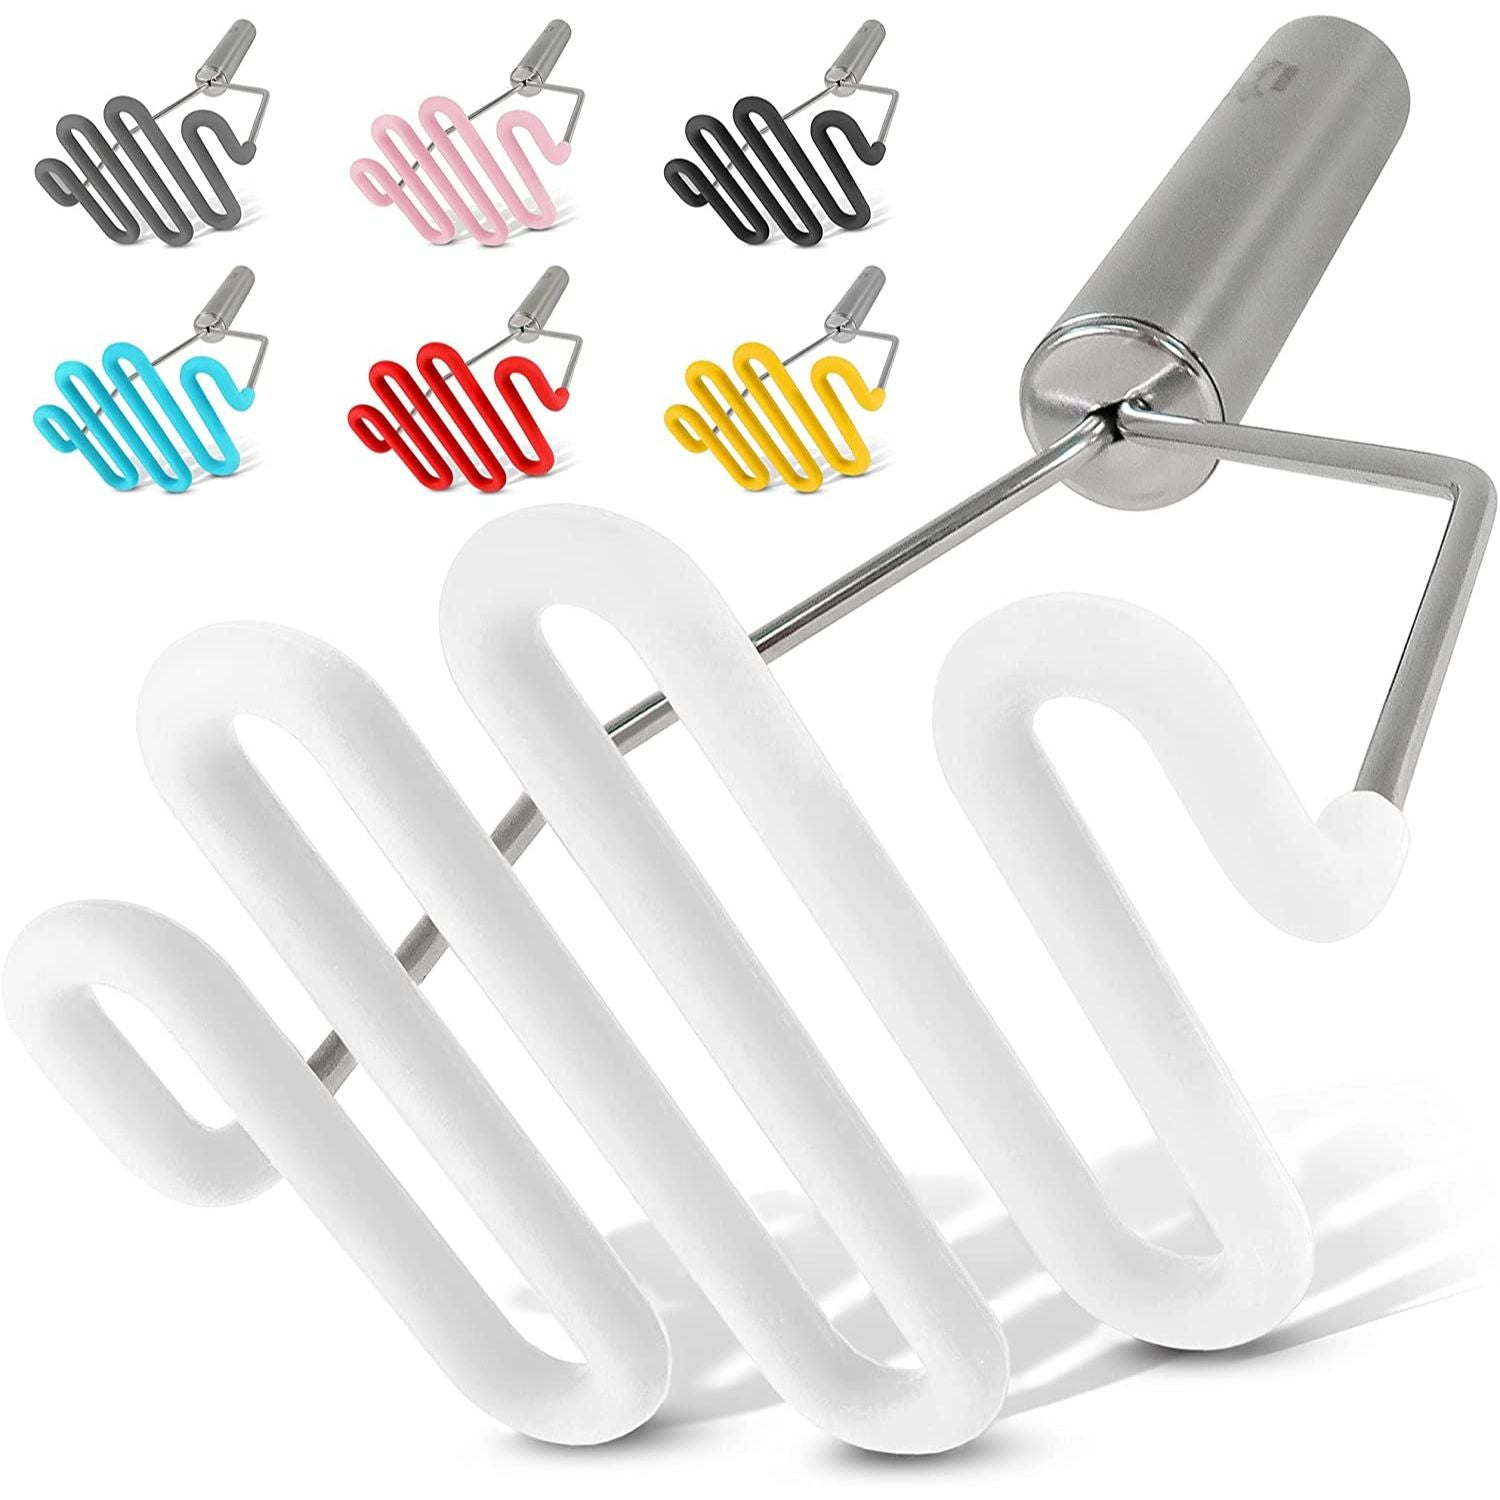 Zulay Kitchen Potato Masher with Premium Silicone-Coated Stainless